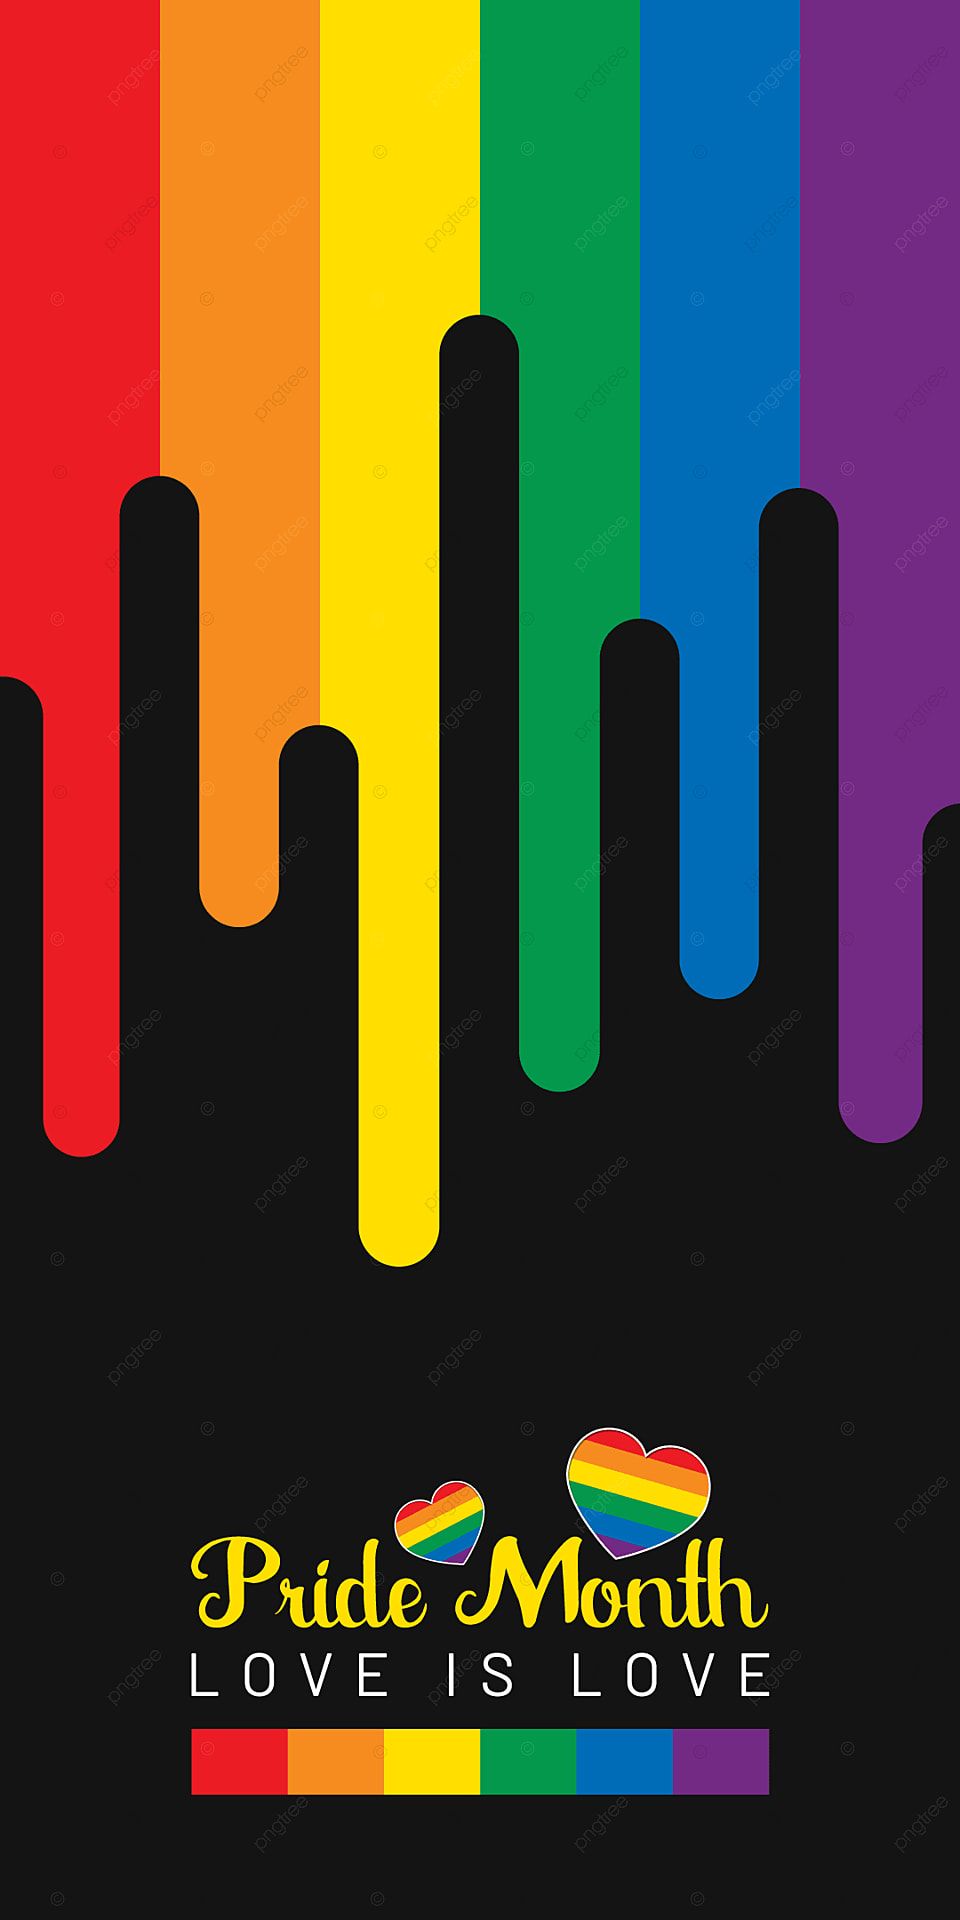 Pride Month Colorful And Black Background Mobile Phone Wallpaper, Pride, Rainbow, Gay Background Image for Free Download